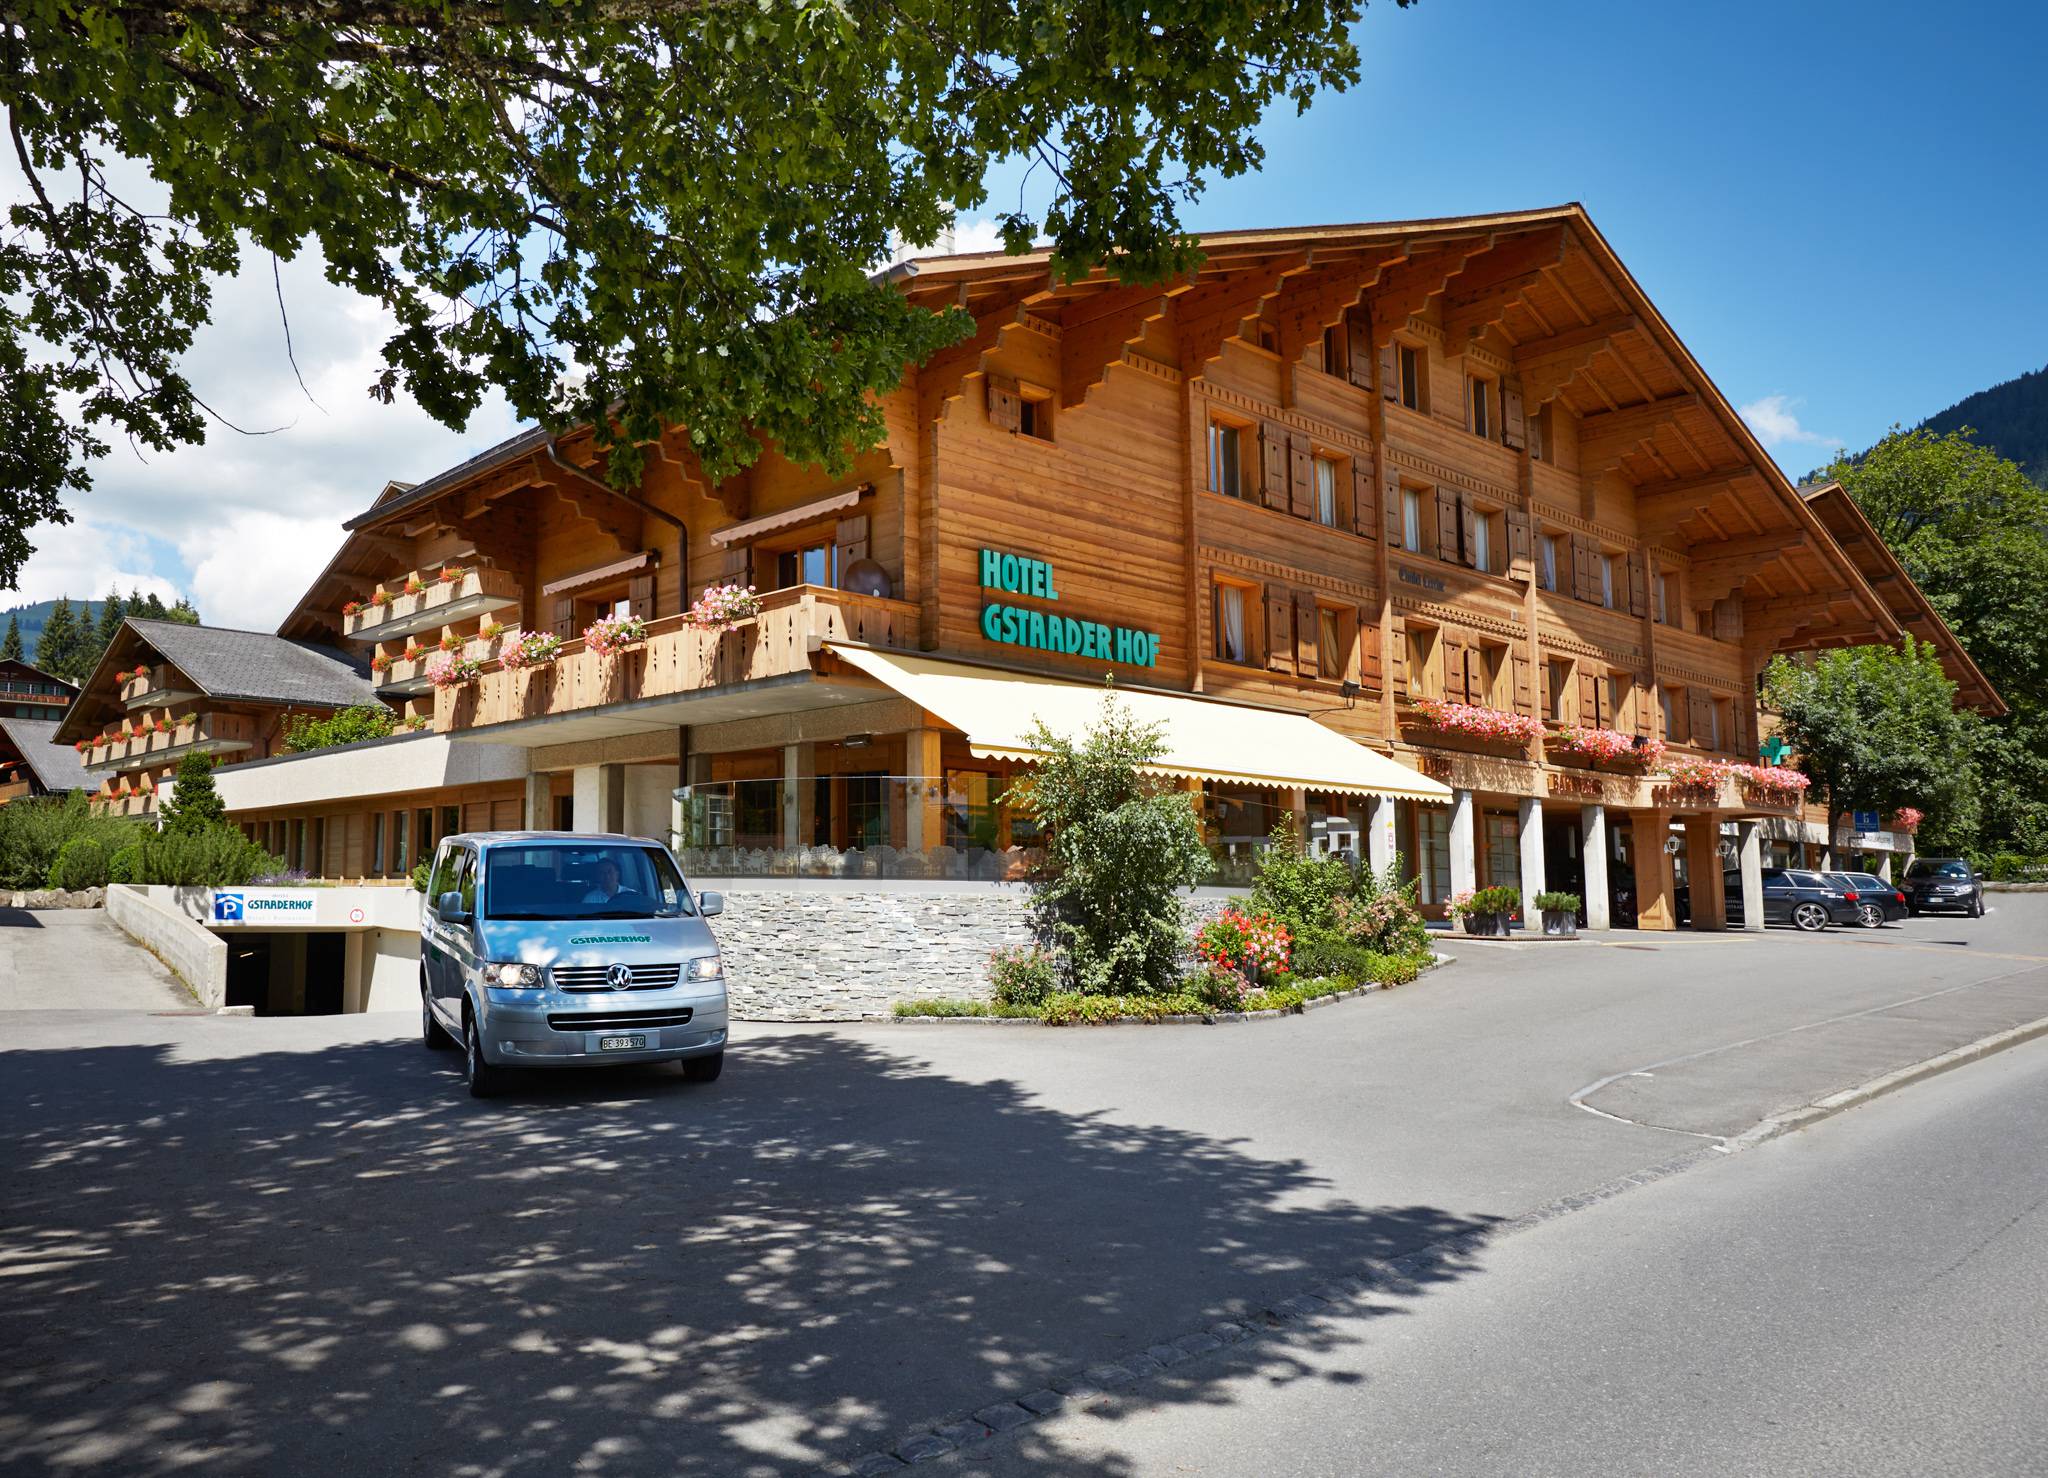 Close to the centre & quiet location: Location of the Hotel Gstaaderhof - Hotel Gstaaderhof